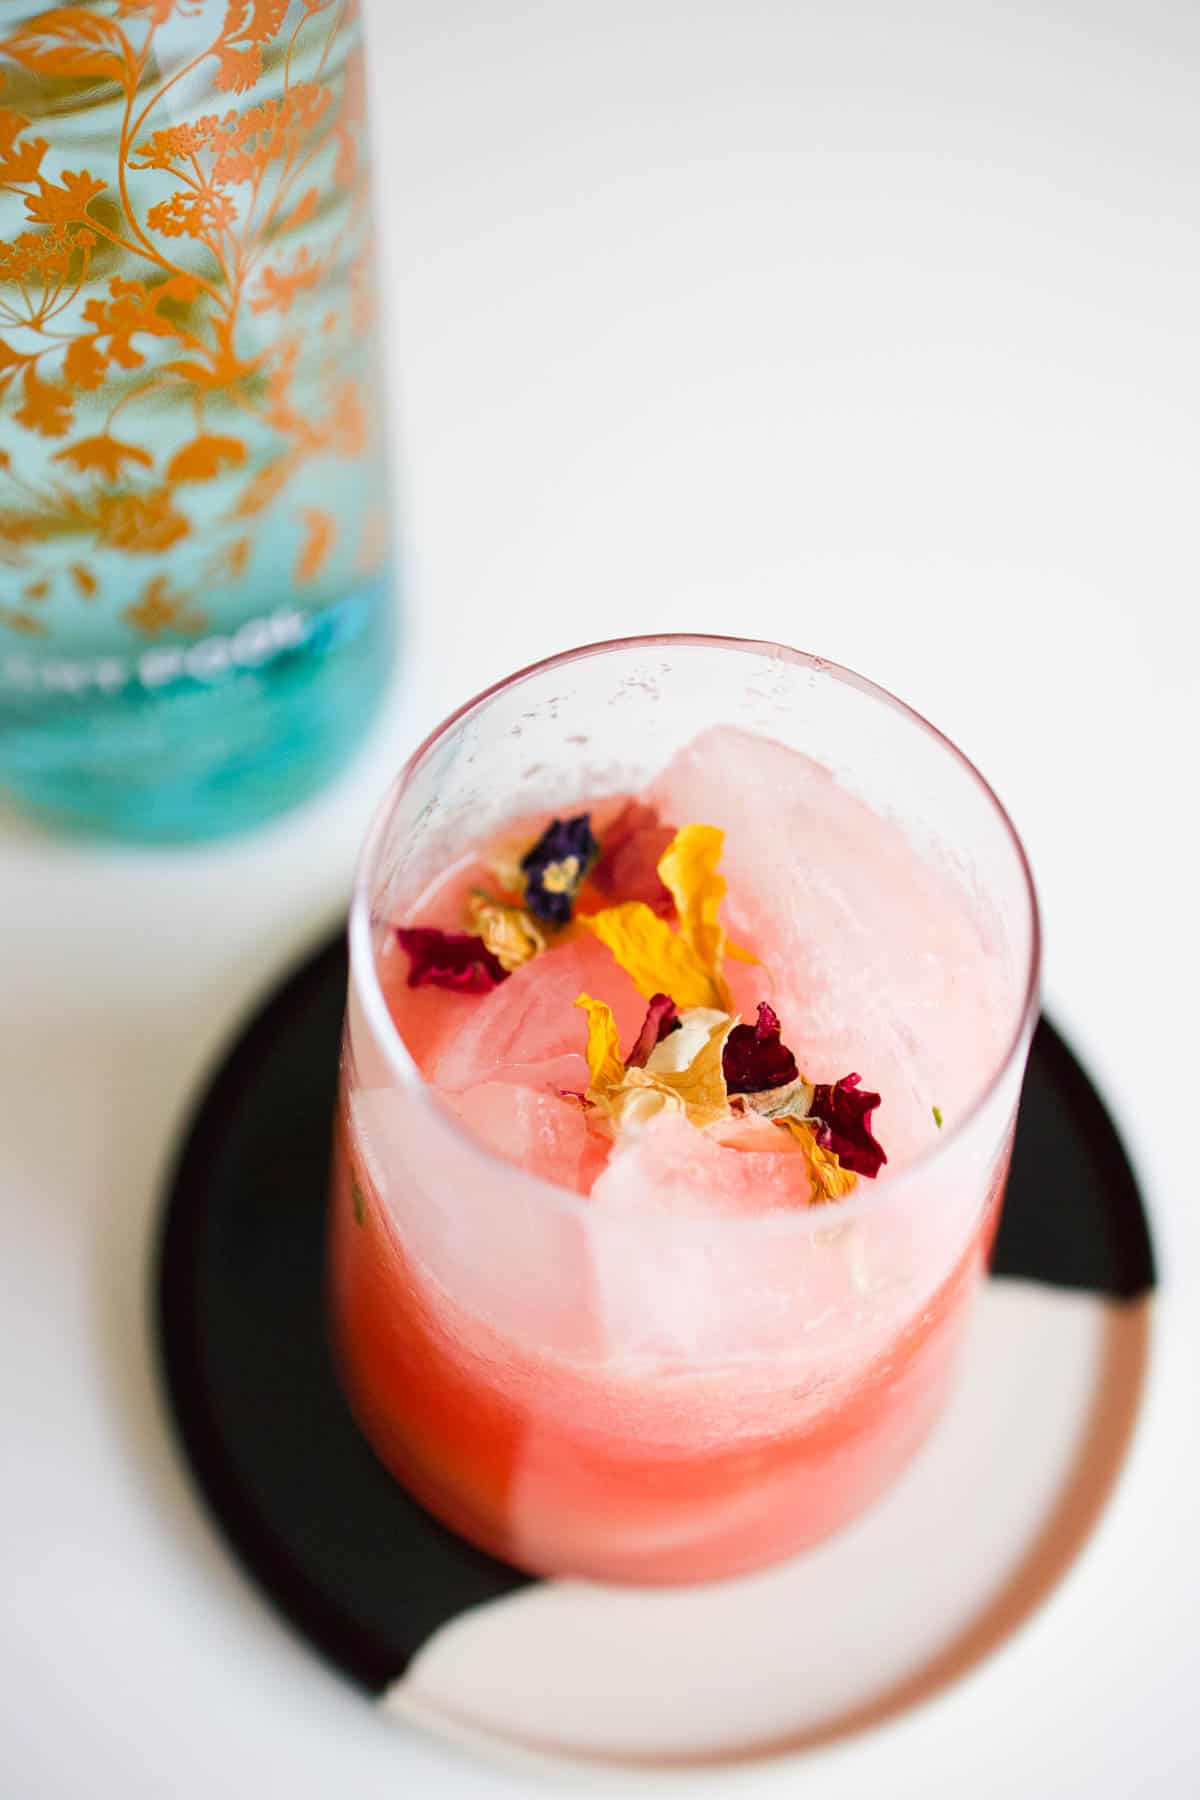 Watermelon juice and gin on the rocks garnished with edible flowers.